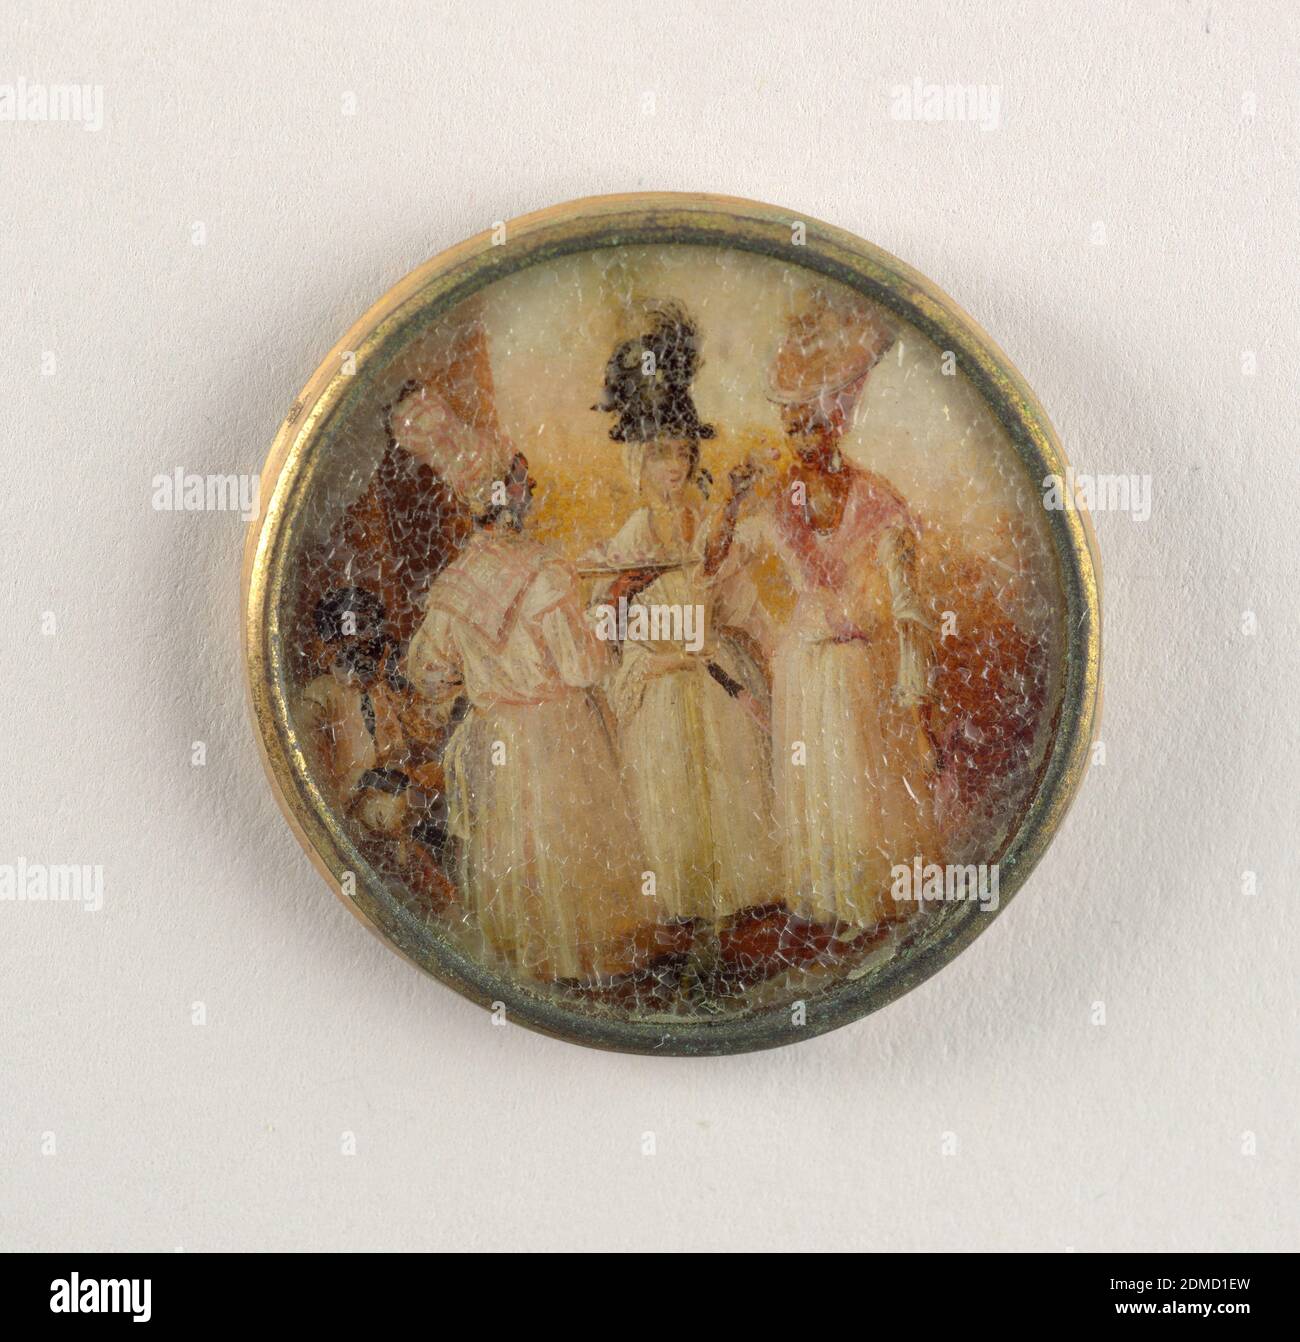 Button, Gouache paint on tin verre fixé, ivory (backing), glass, gilt metal, Button depicting scene of three women in the foreground and a seated man in the background in a partial landscape. The women are all wearing white dresses, turbans and scarves around their necks. The central figure wears a dark turban and has lighter skin than the other two., late 18th century, costume & accessories, Decorative Arts, Button Stock Photo